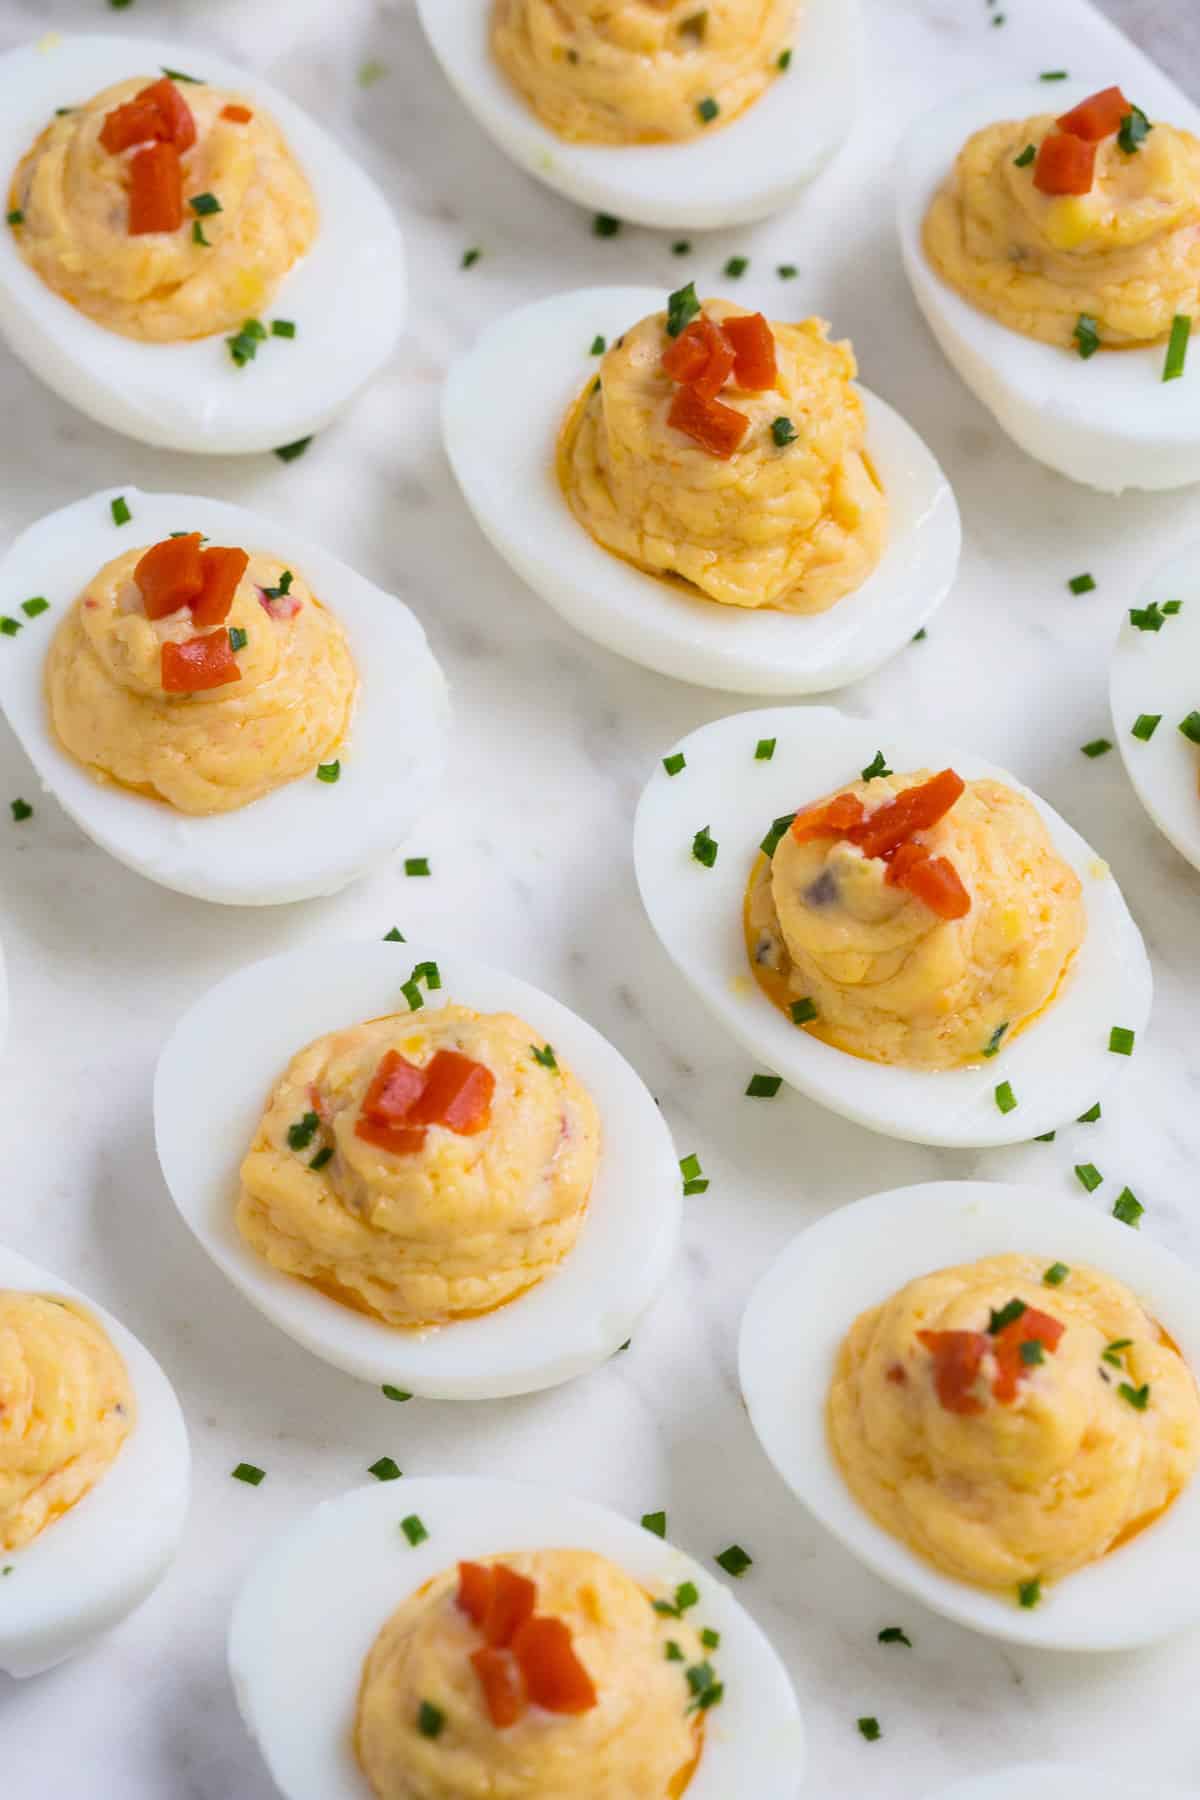 pimento cheese deviled eggs topped with chives.